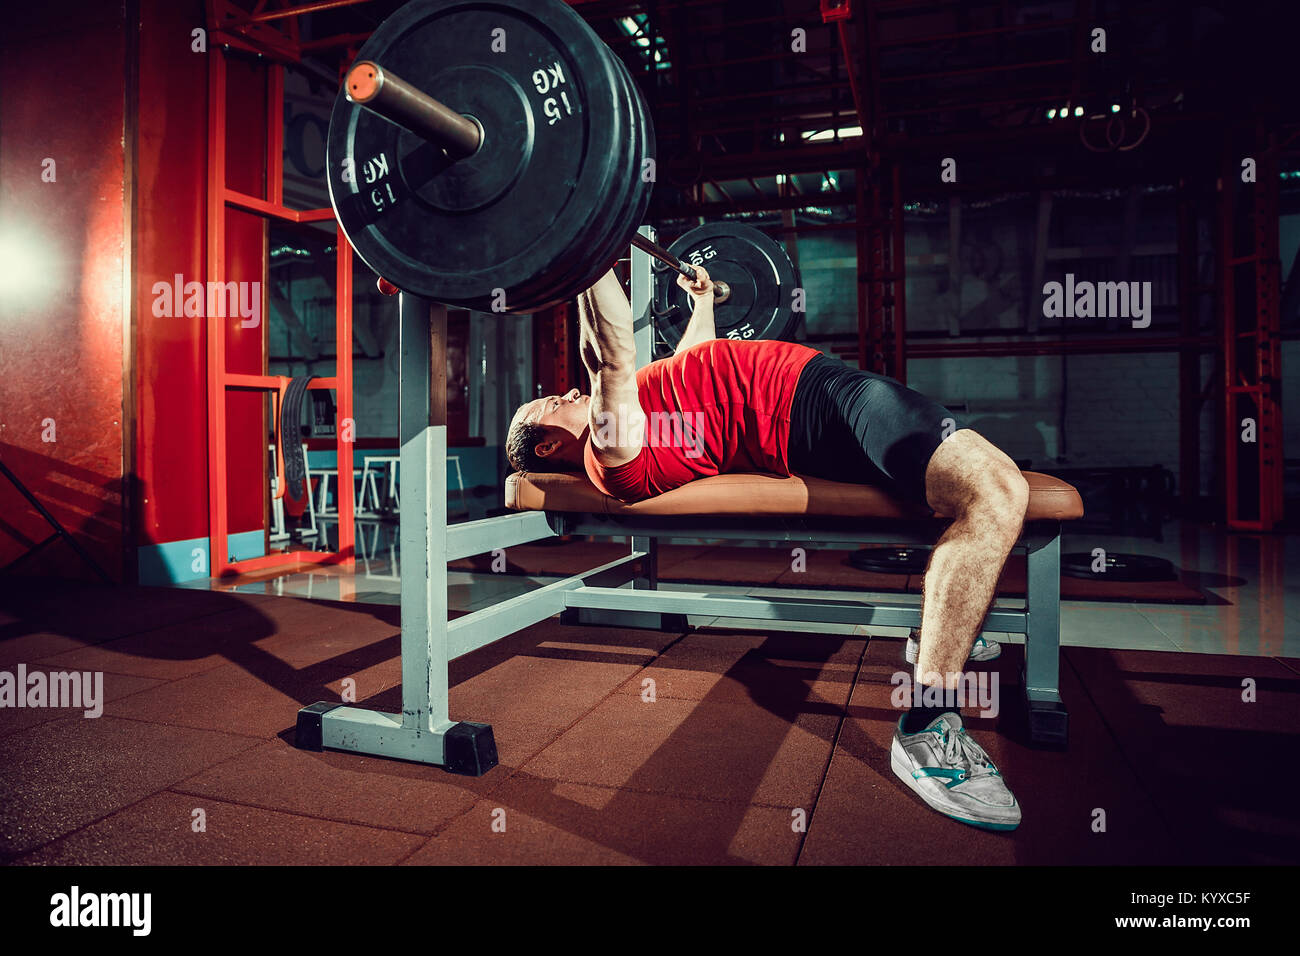 Man doing bench press workout in gym Stock Photo